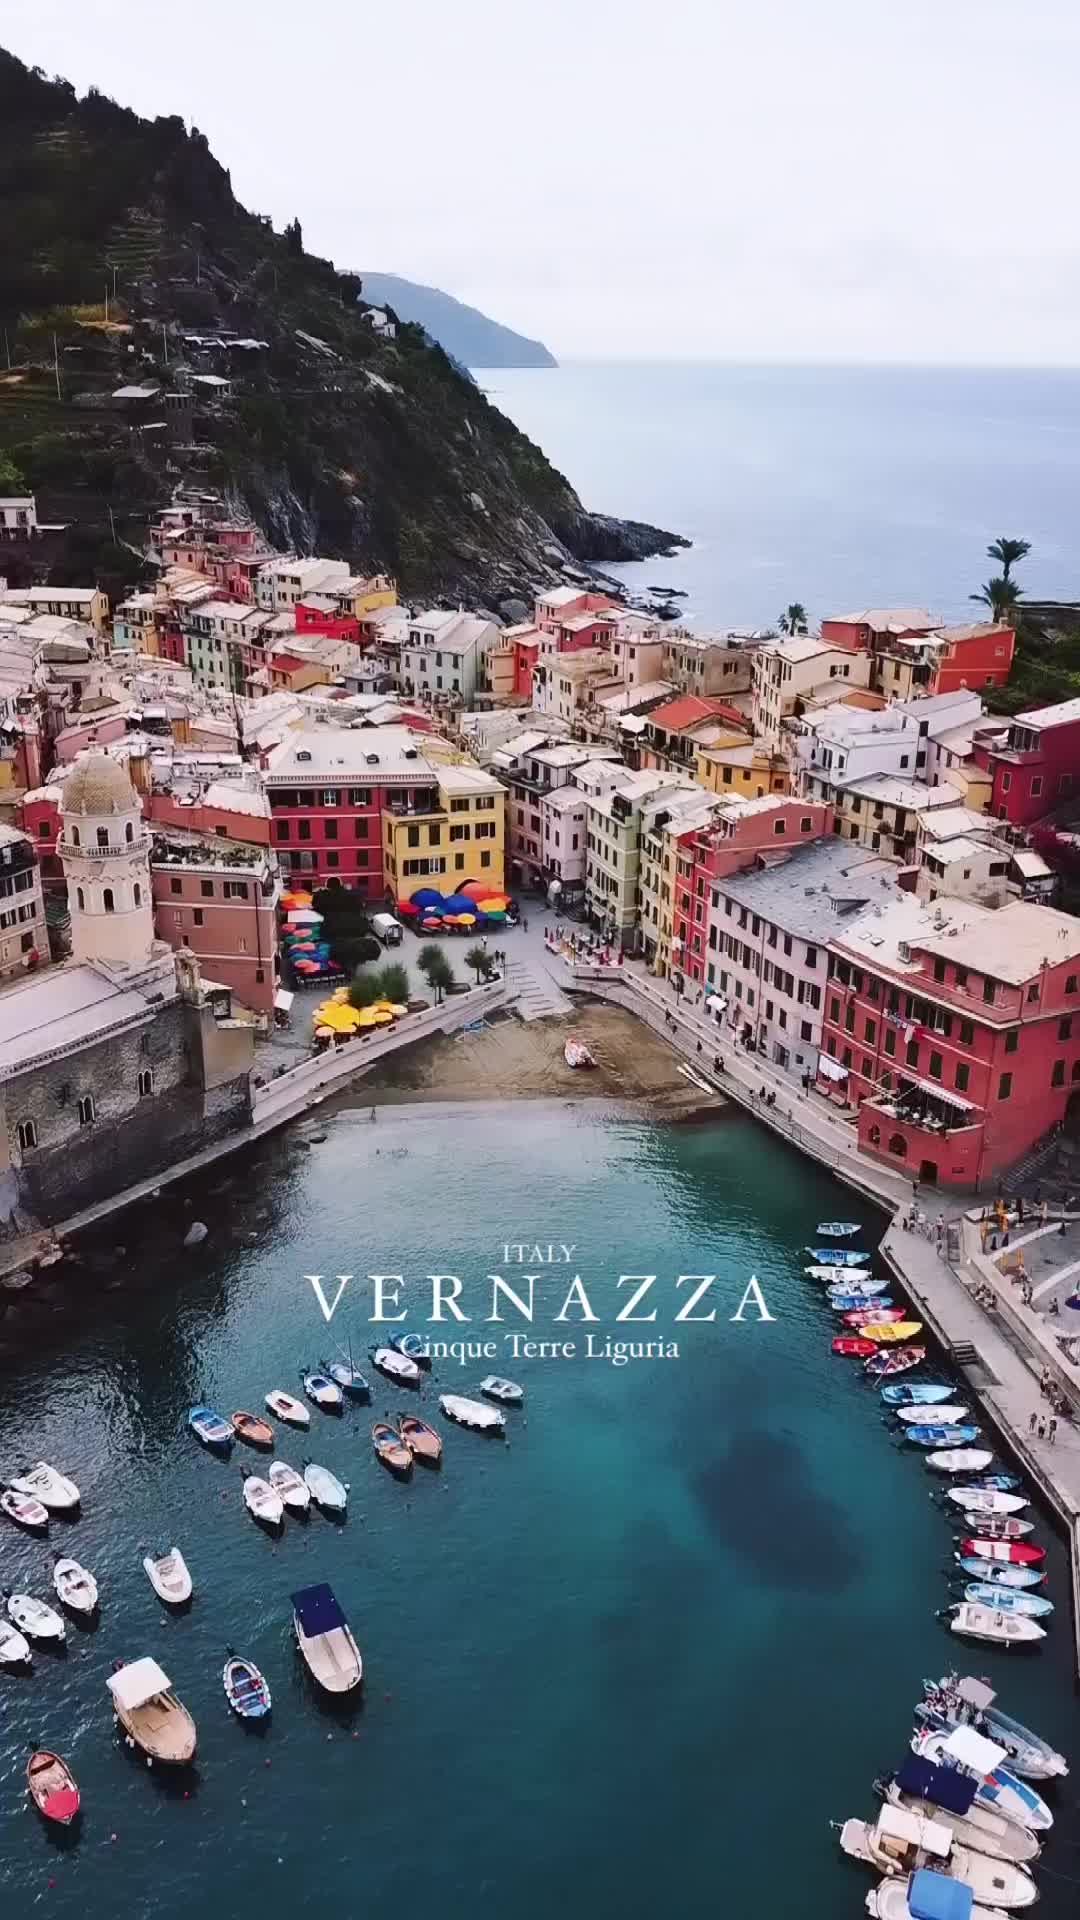 #Vernazza You’re my favorite of #CinqueTerre 🇮🇹 #Liguria 
#Italy